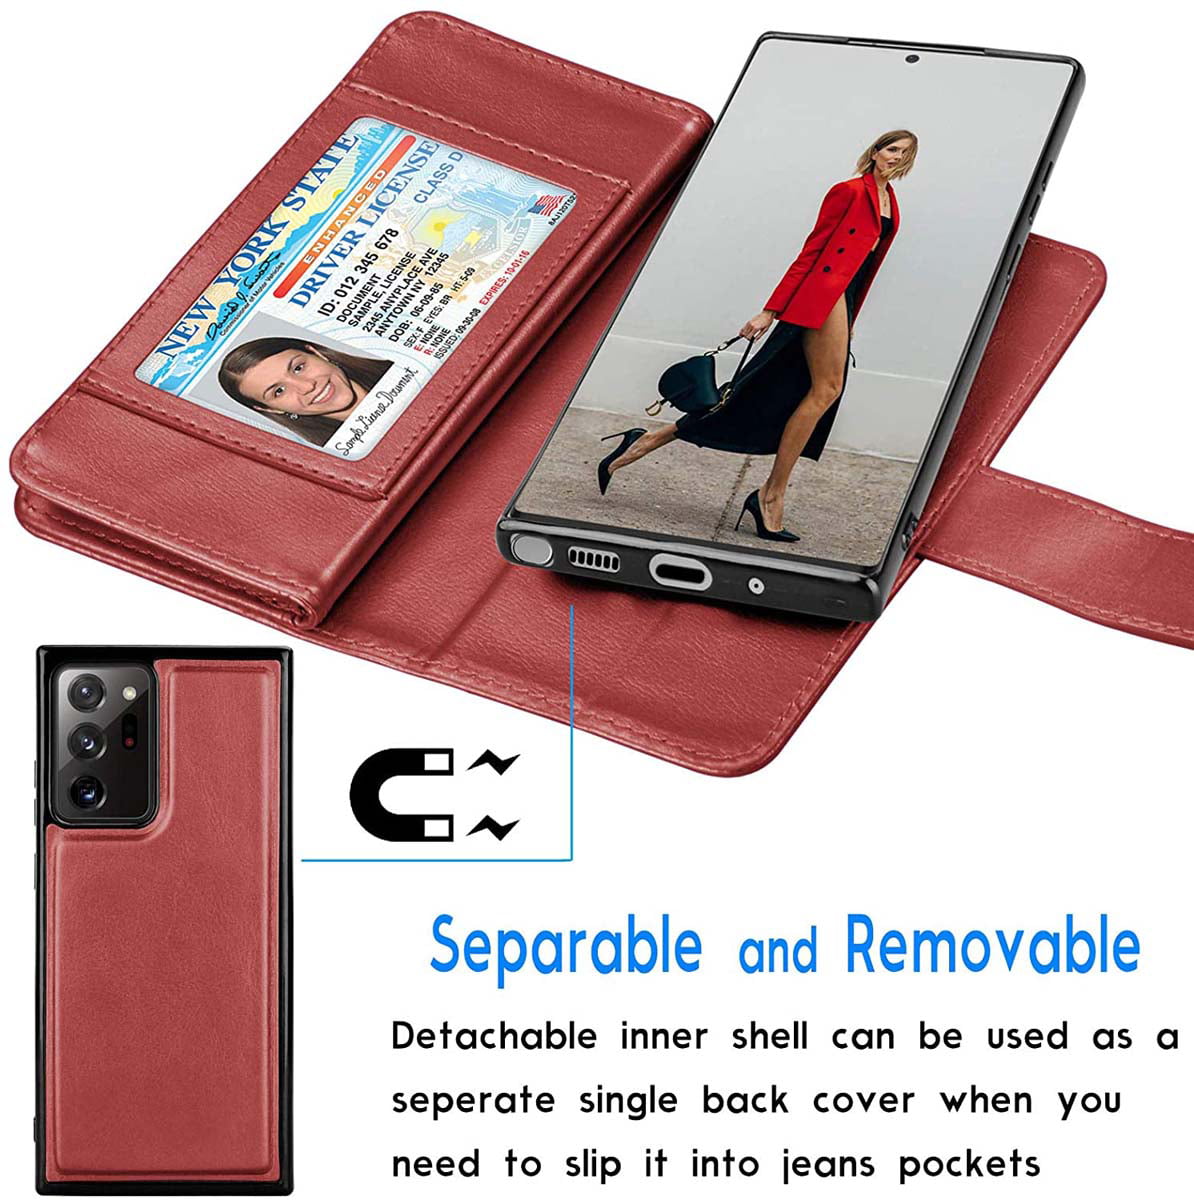 Fansipro Phone Cover Zipper Wallet Folio Case for Samsung Galaxy Note 20,  Premium PU Leather Slim Fit Cover for Galaxy Note 20, 10 Card Slots, 1  Photo